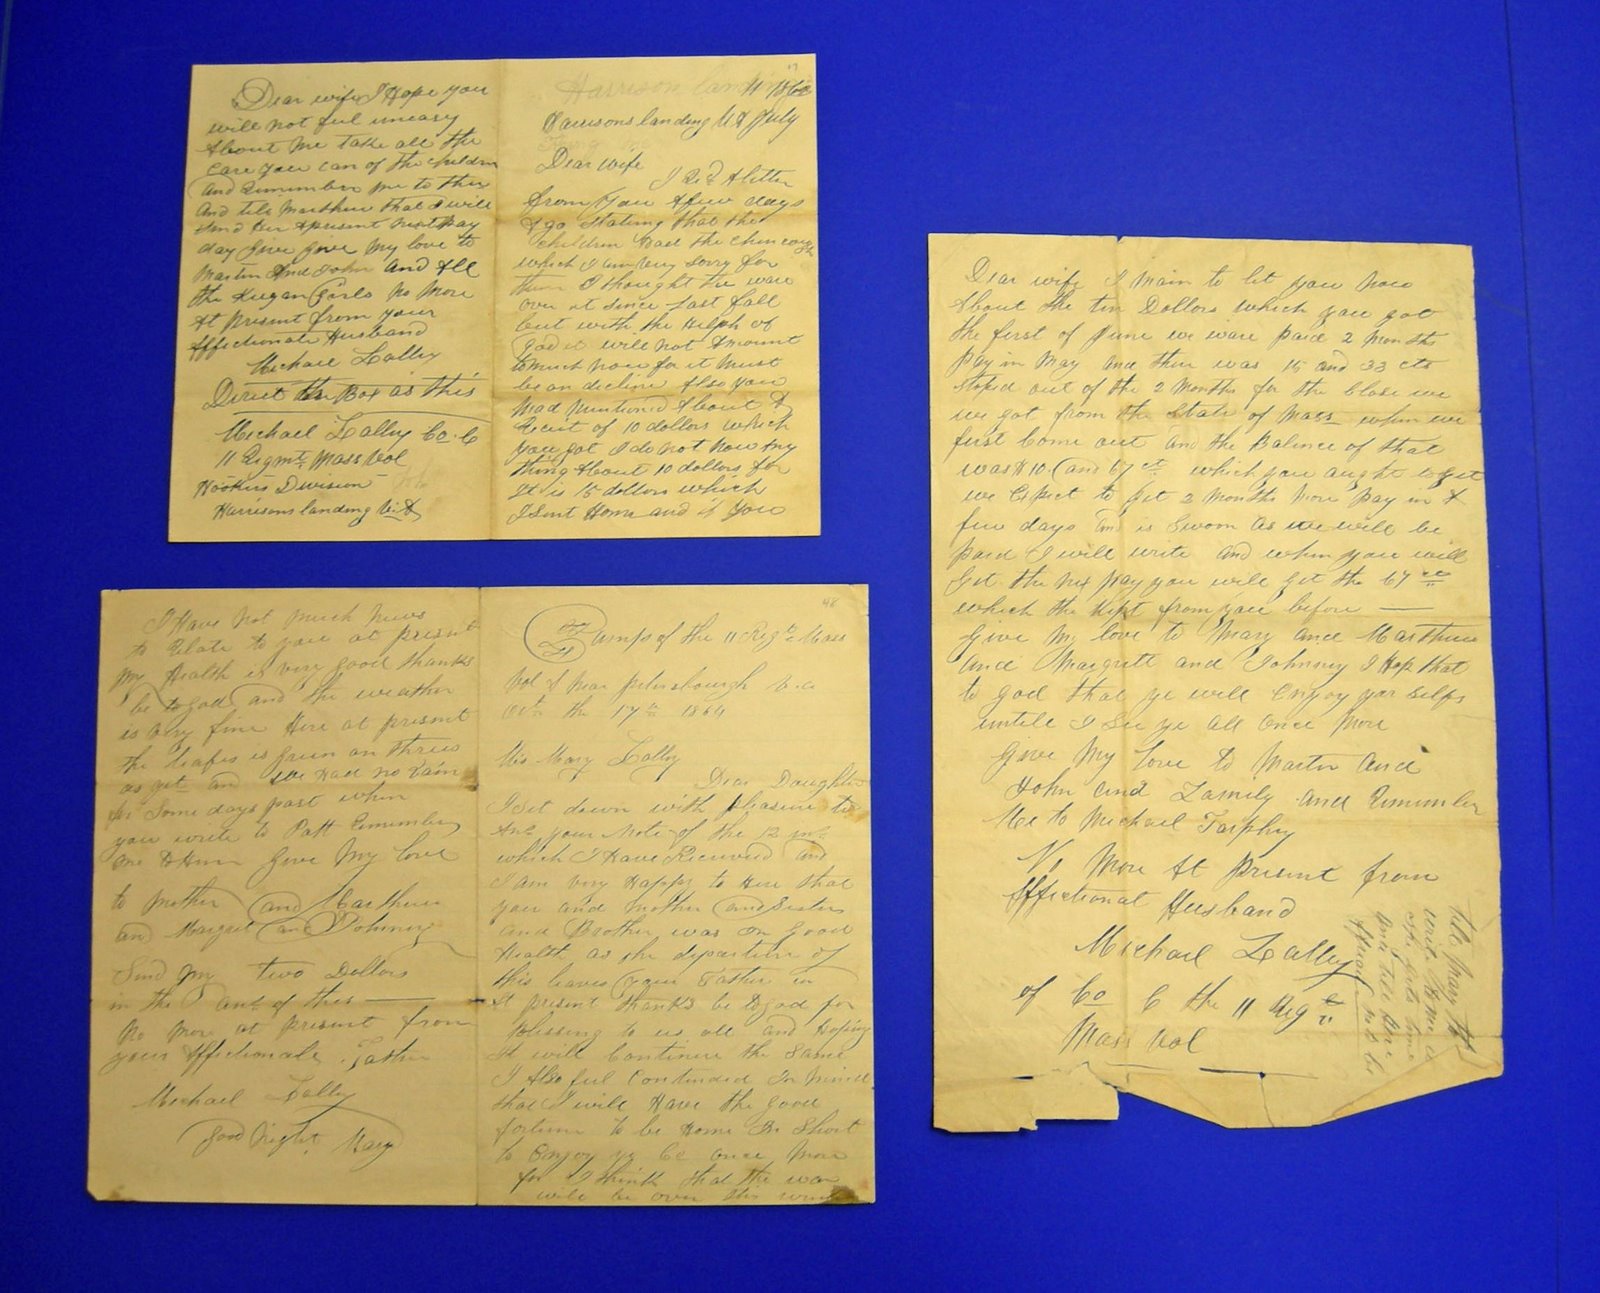 Three pages worth of letters written in cursive ink by Michael Lally during the American Civil War